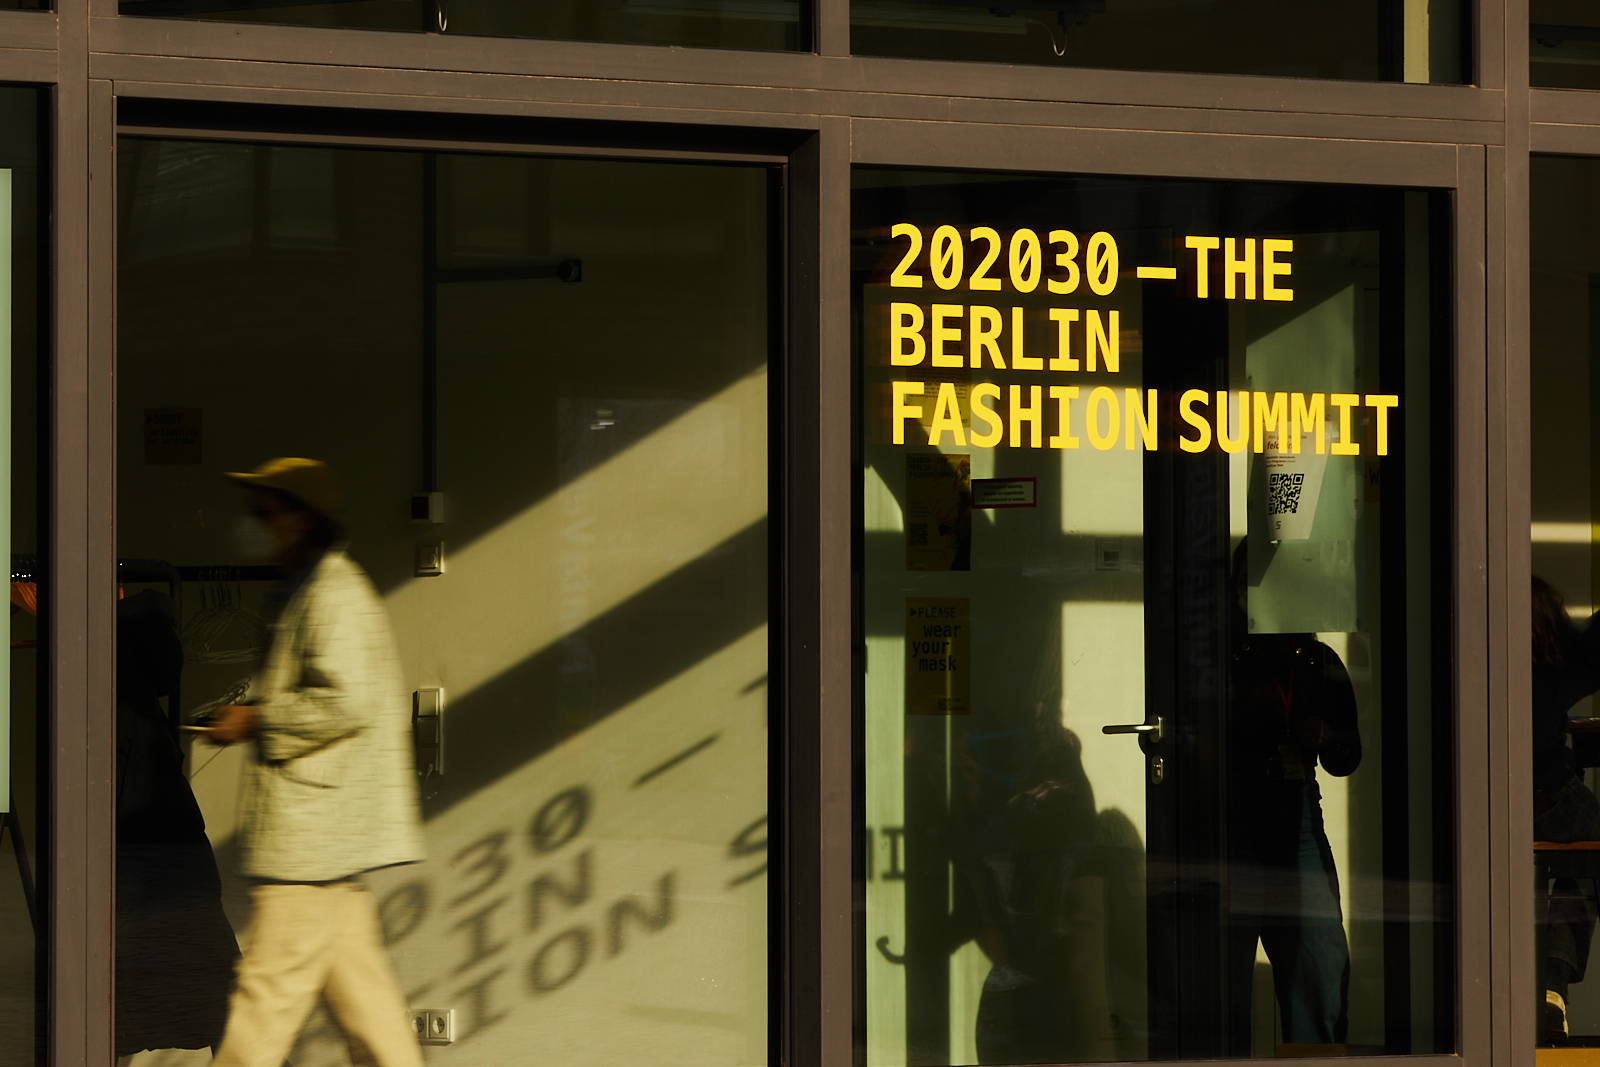 Learn about the themes of this year's Berlin Fashion Summit!